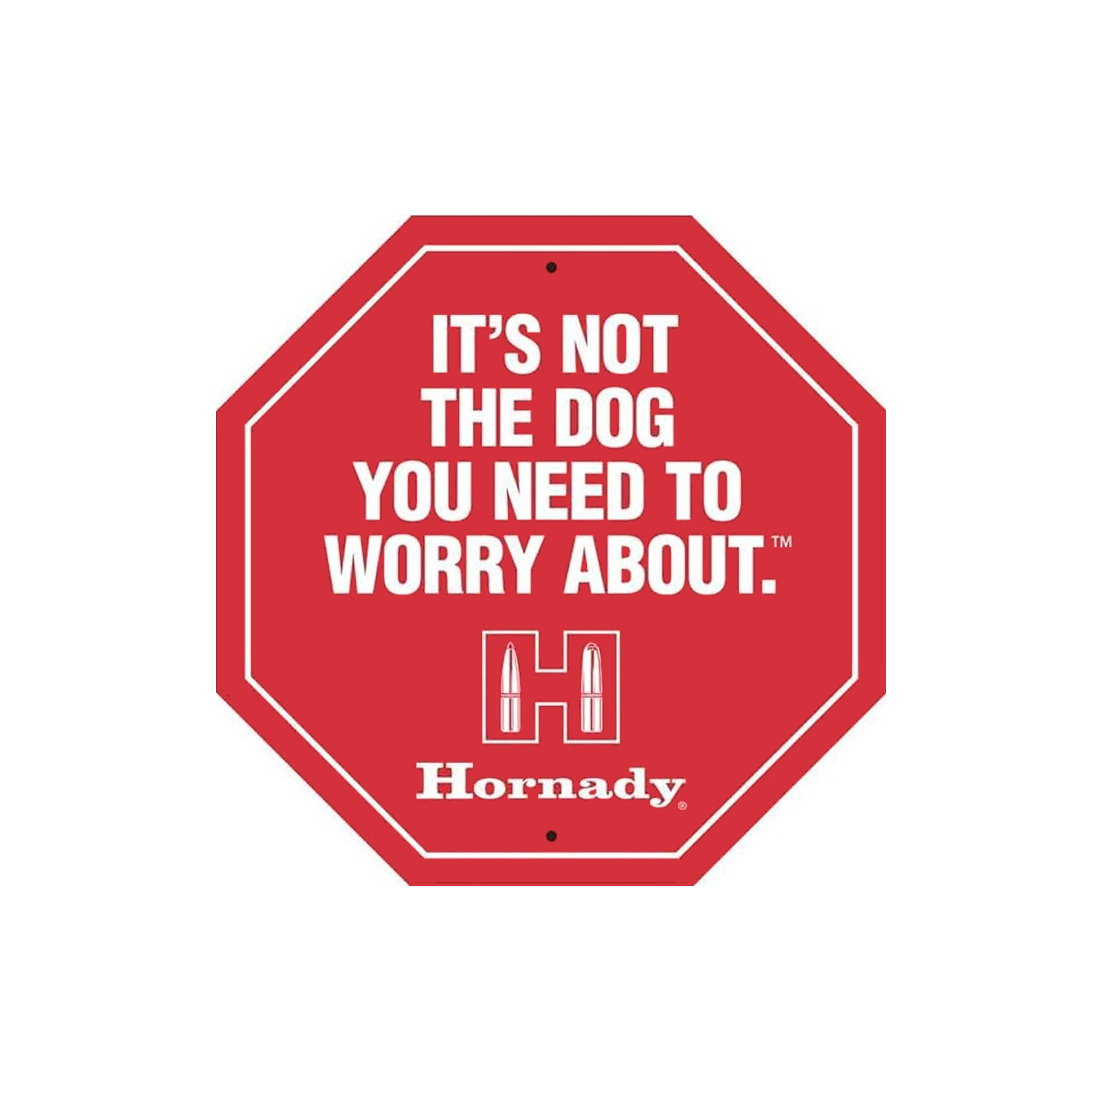 Blechschild Hornday Stoppschild "Its not the dog you need to...." ca. 30x30cm